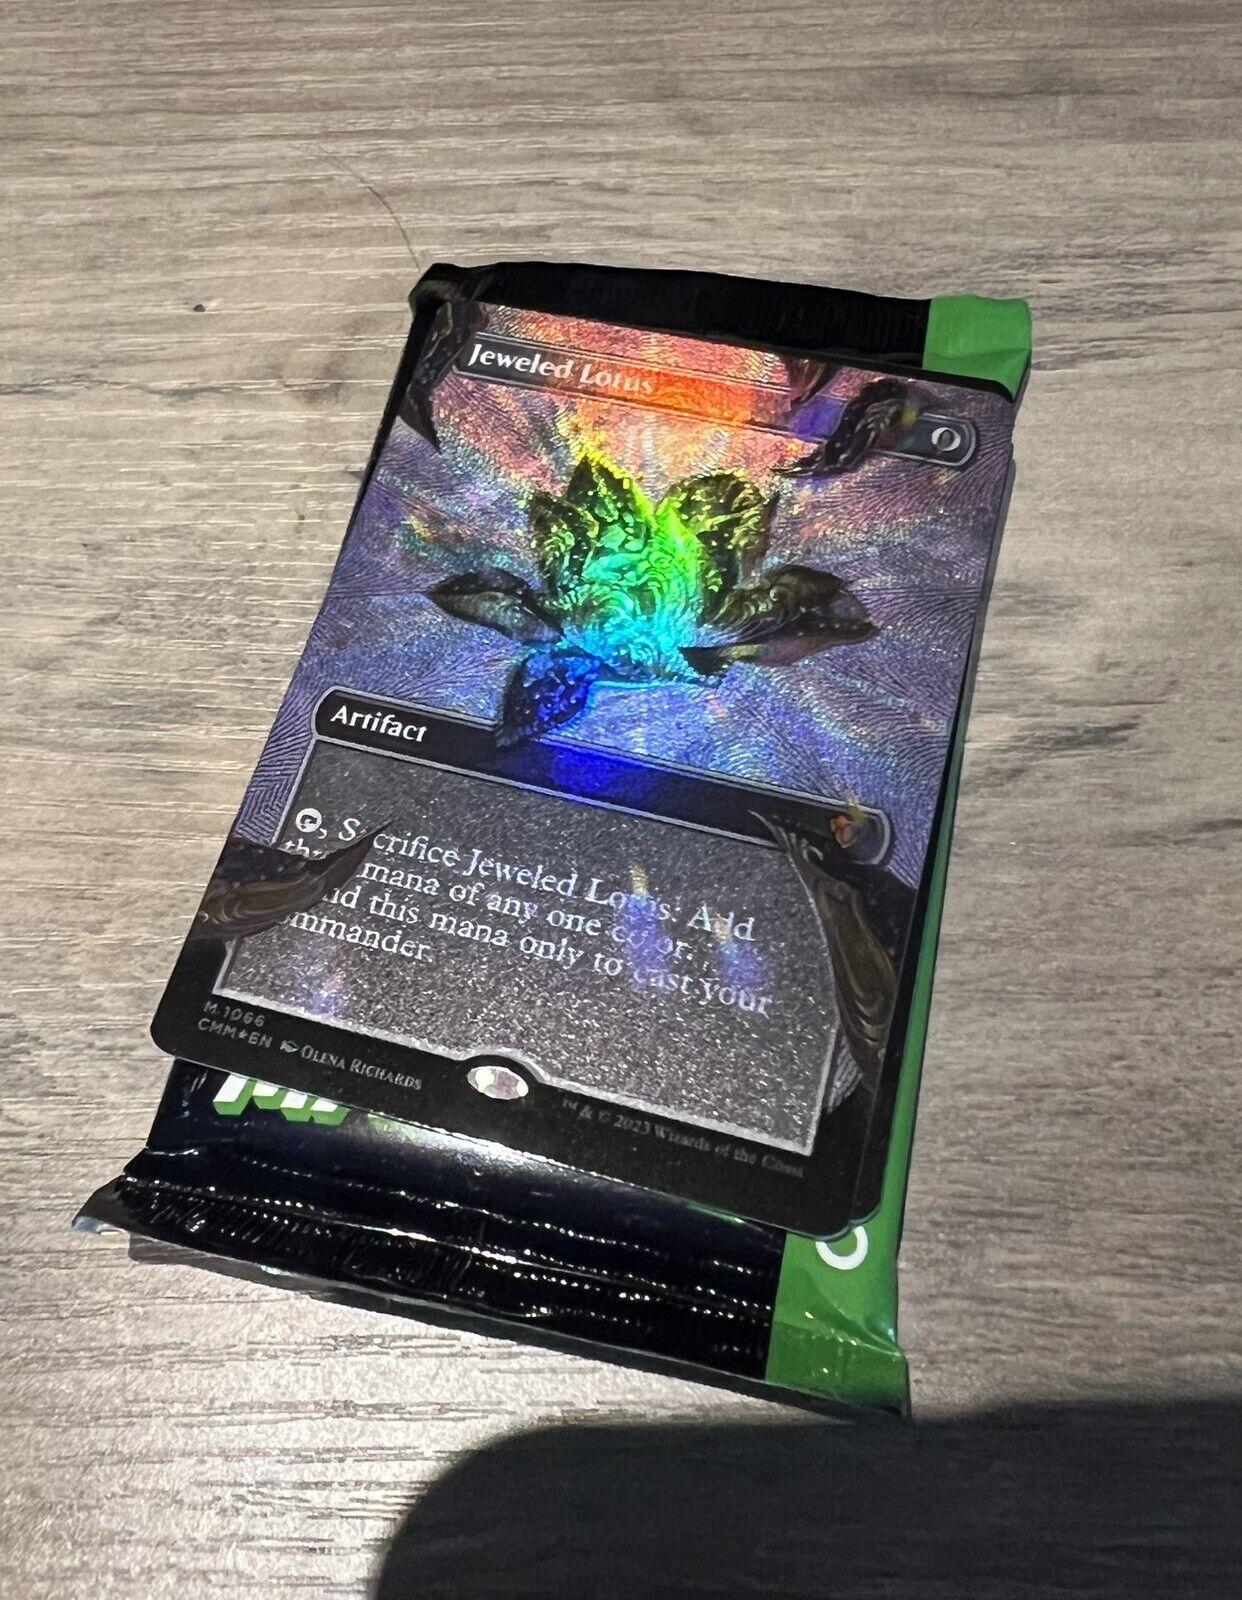 MTG Jeweled Lotus Textured Foil Mythic Commander Masters 1066 Pack To Sleeve!